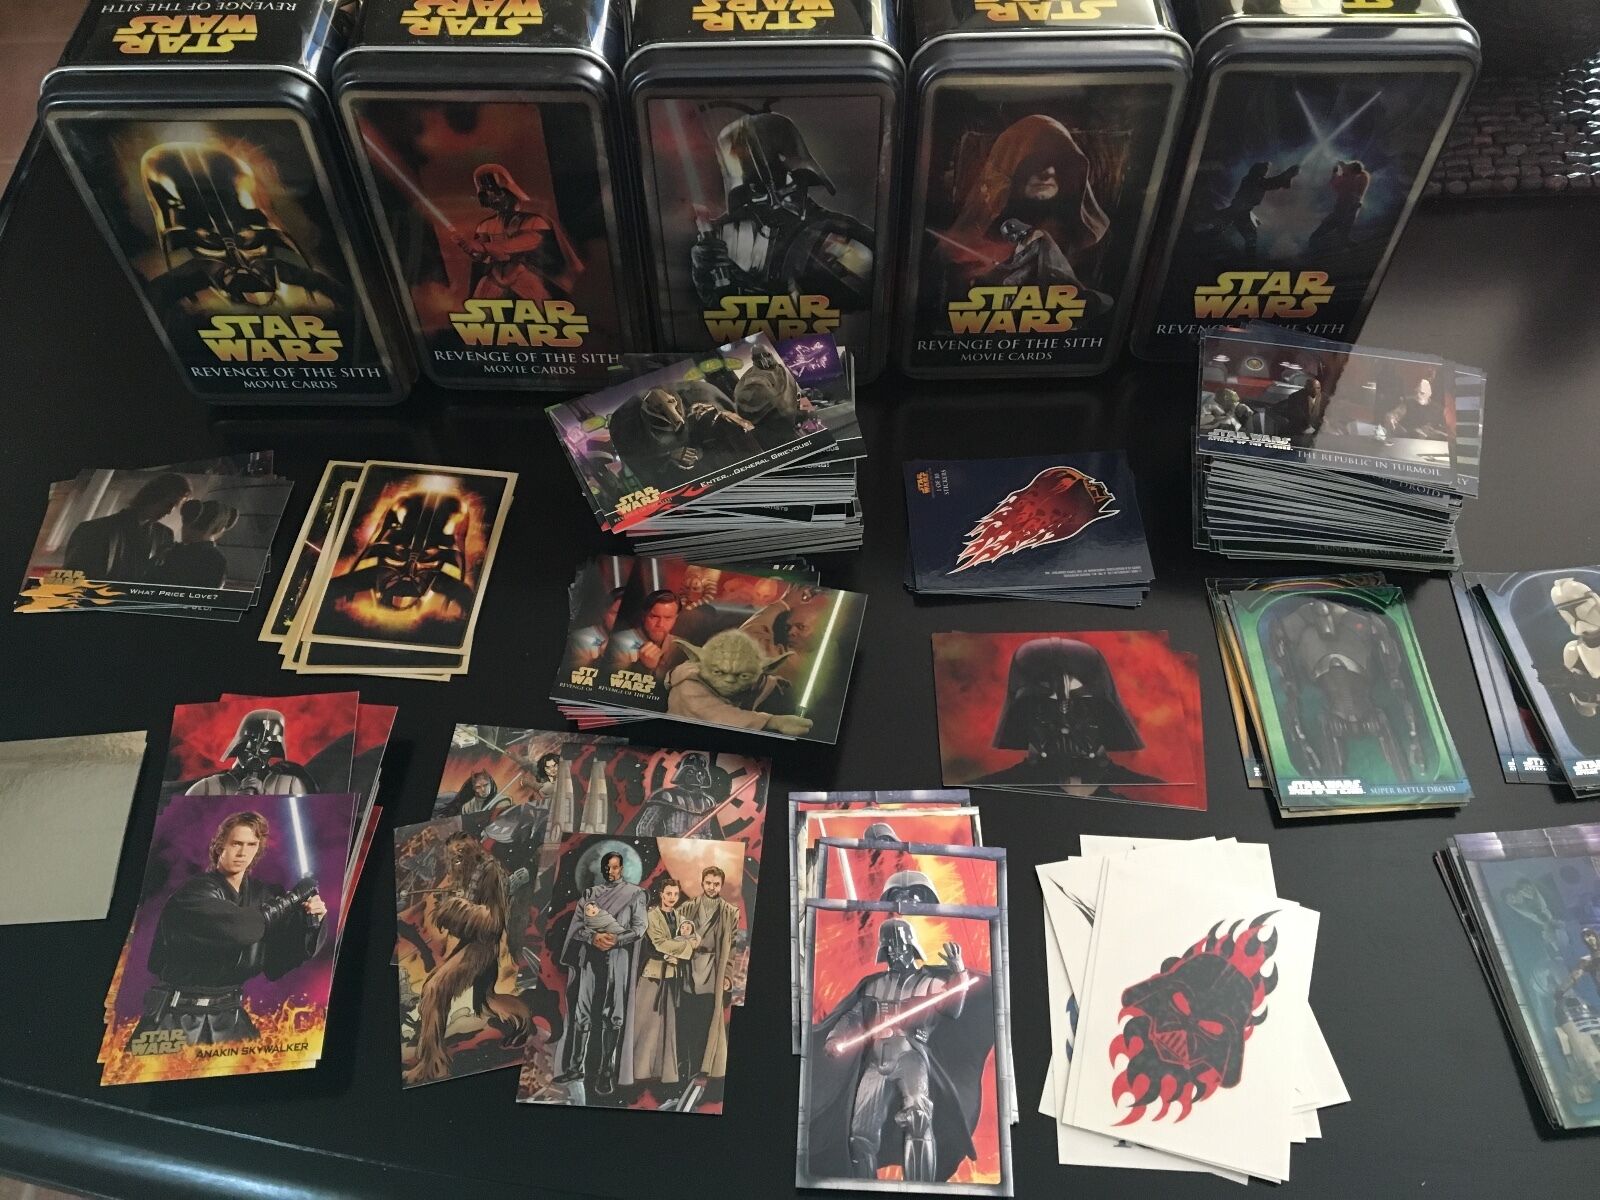 Huge Lot of 2002 & 2006 Topps Star Wars Cards - Many Special Inserts + 5 Tins 